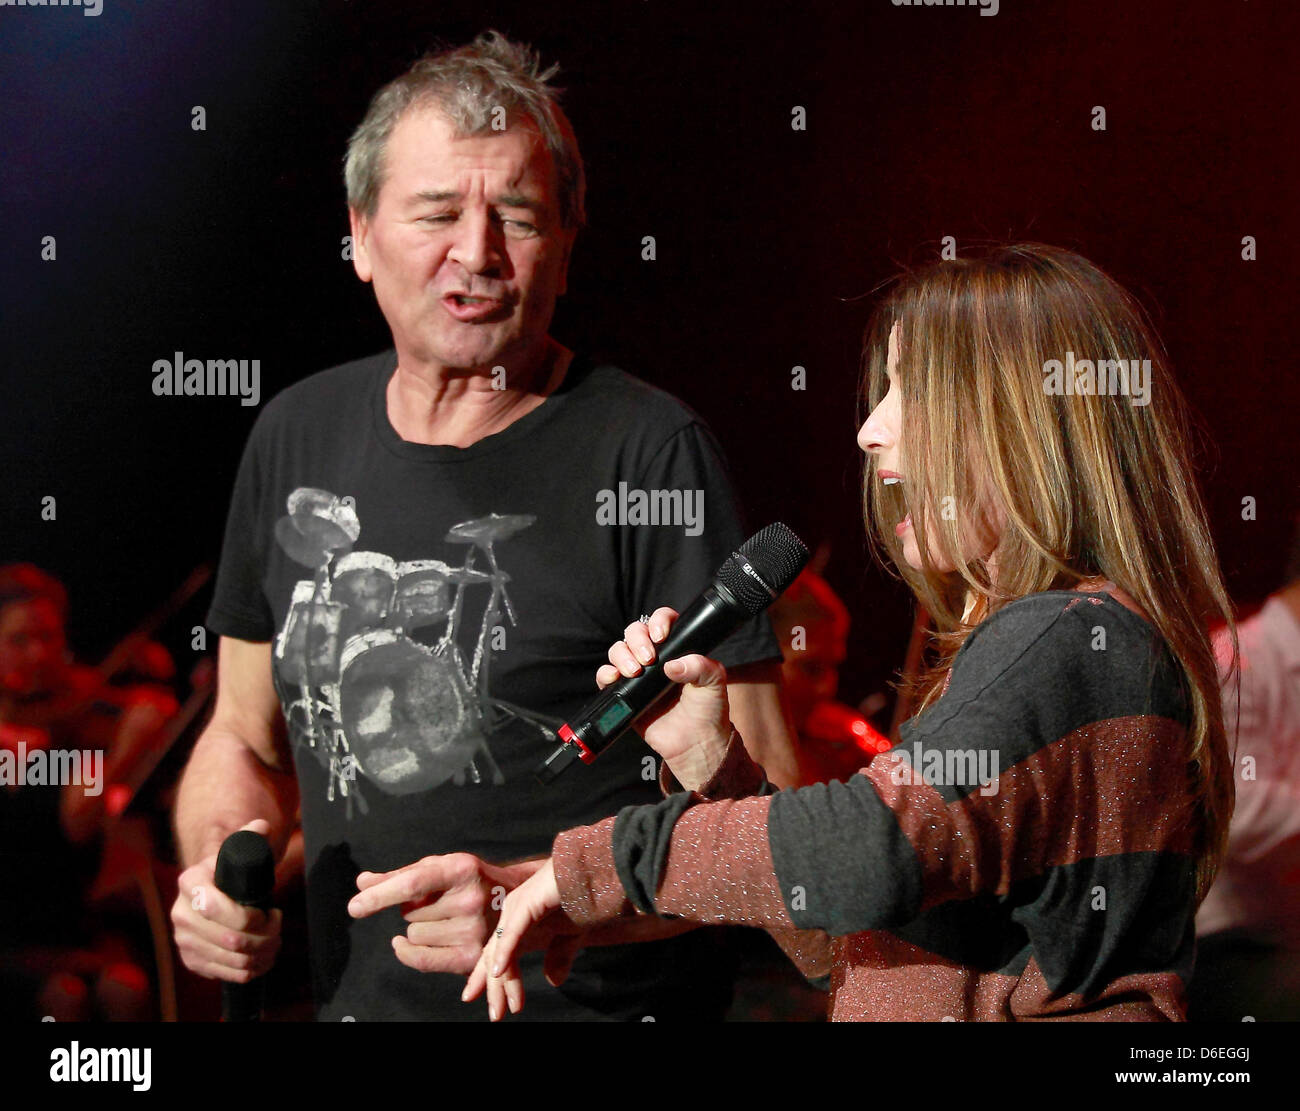 British Deep Purple singer Ian Gillan and US singer  Robin Beck perform on stage during the concert 'Rock meets Classic' at the Max-Schmeling-Halle in Berlin, Germany, 17 January 2012. Photo: Lutz Mueller-Bohlen Stock Photo